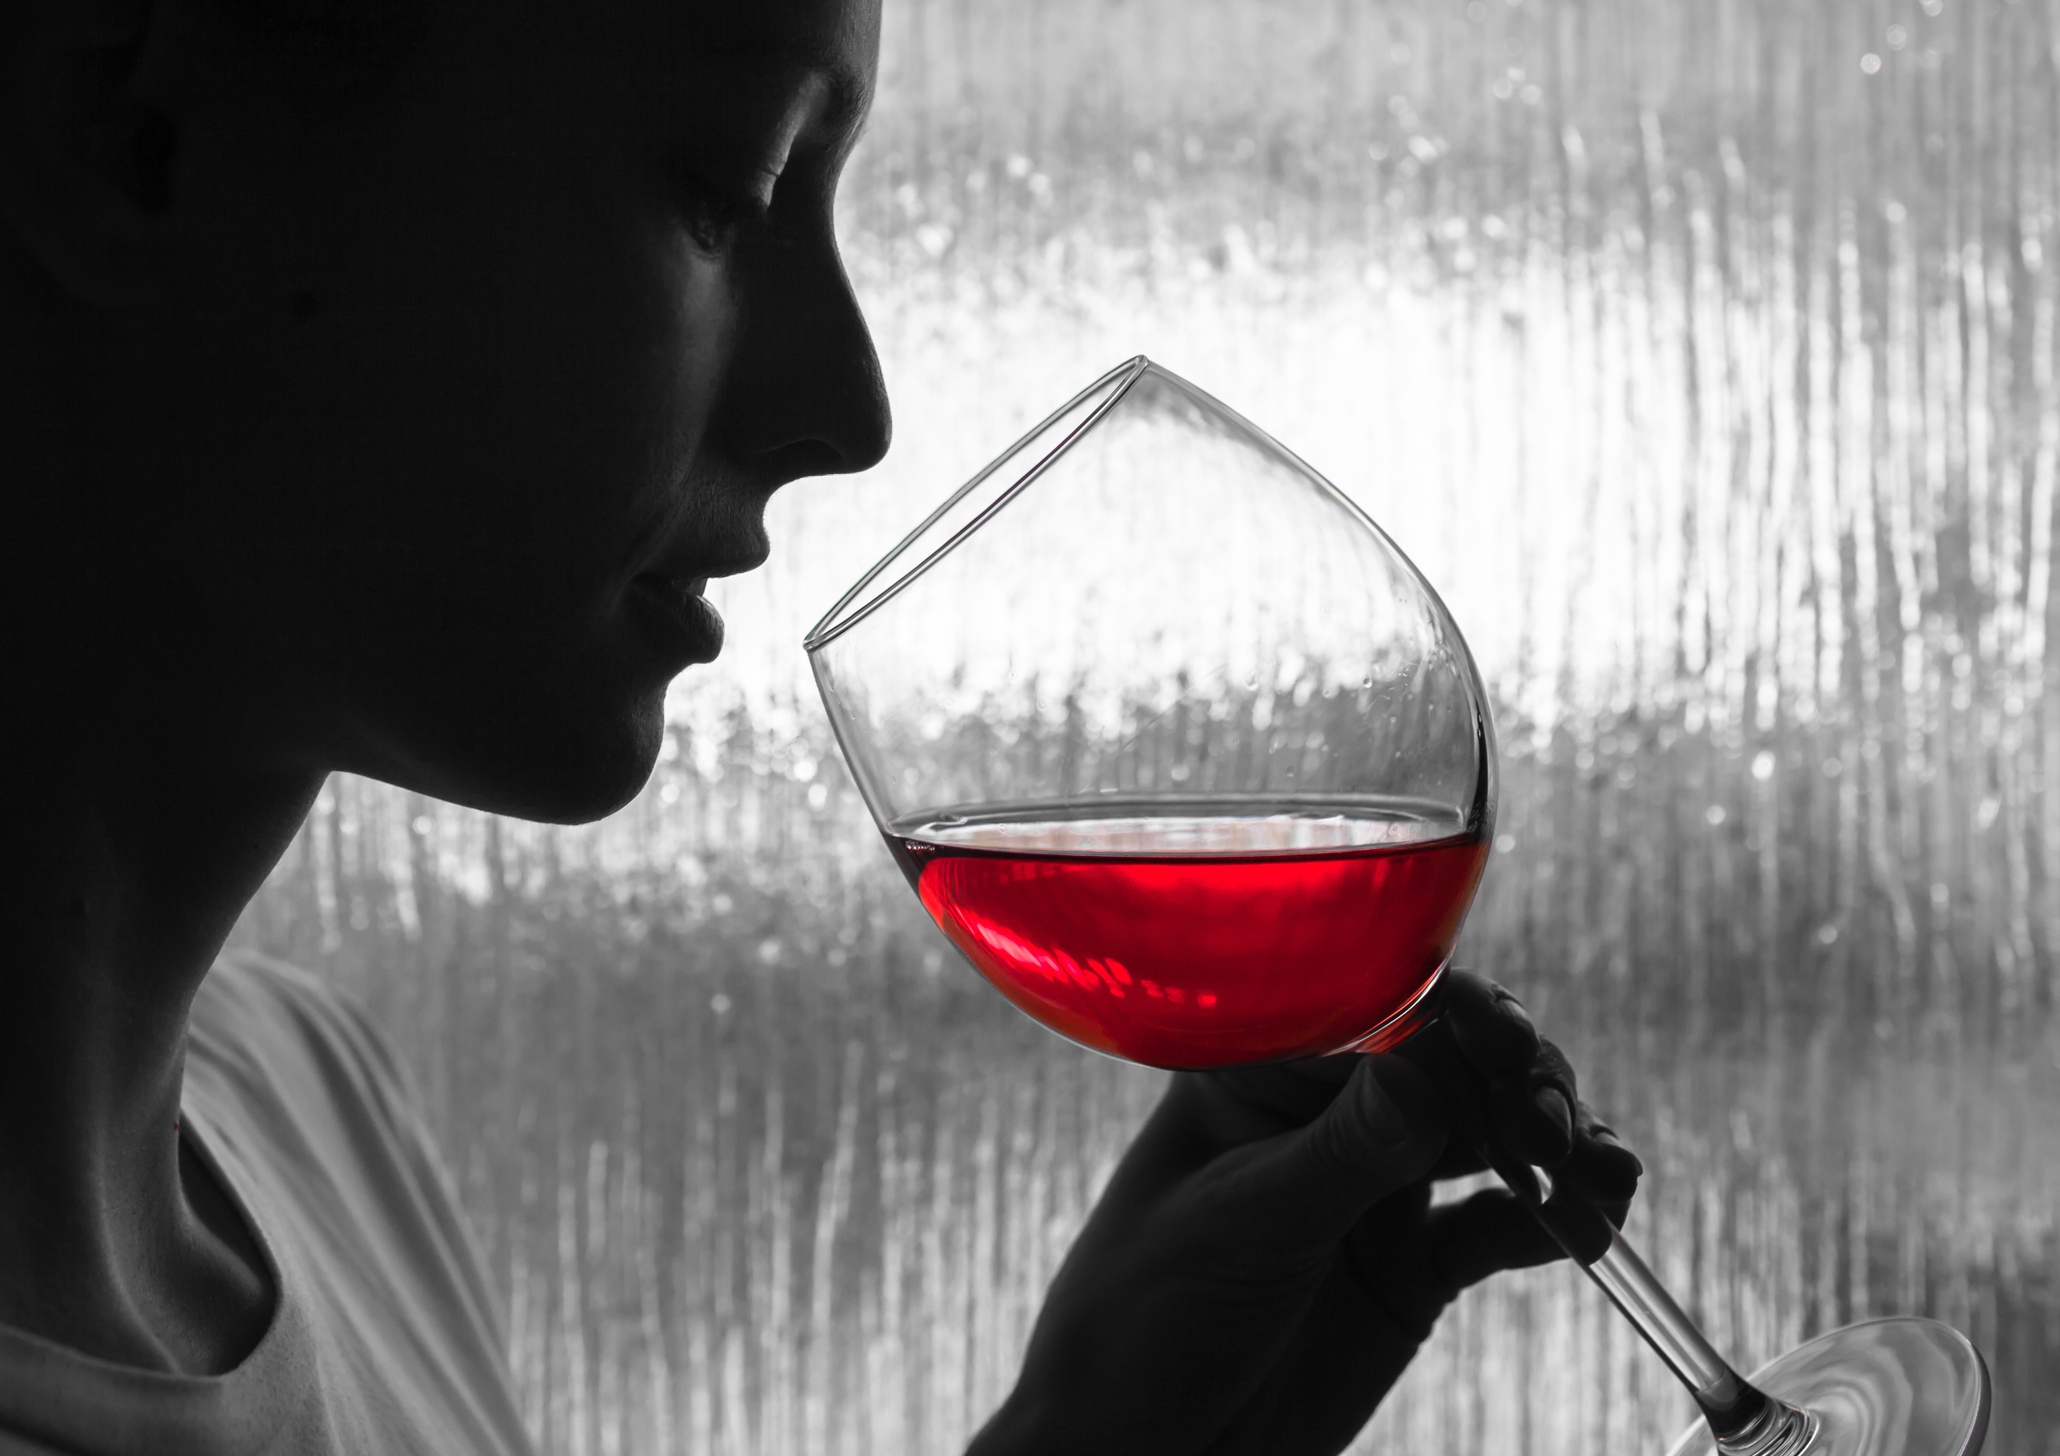 Women and Alcohol: The True Risks of Drinking